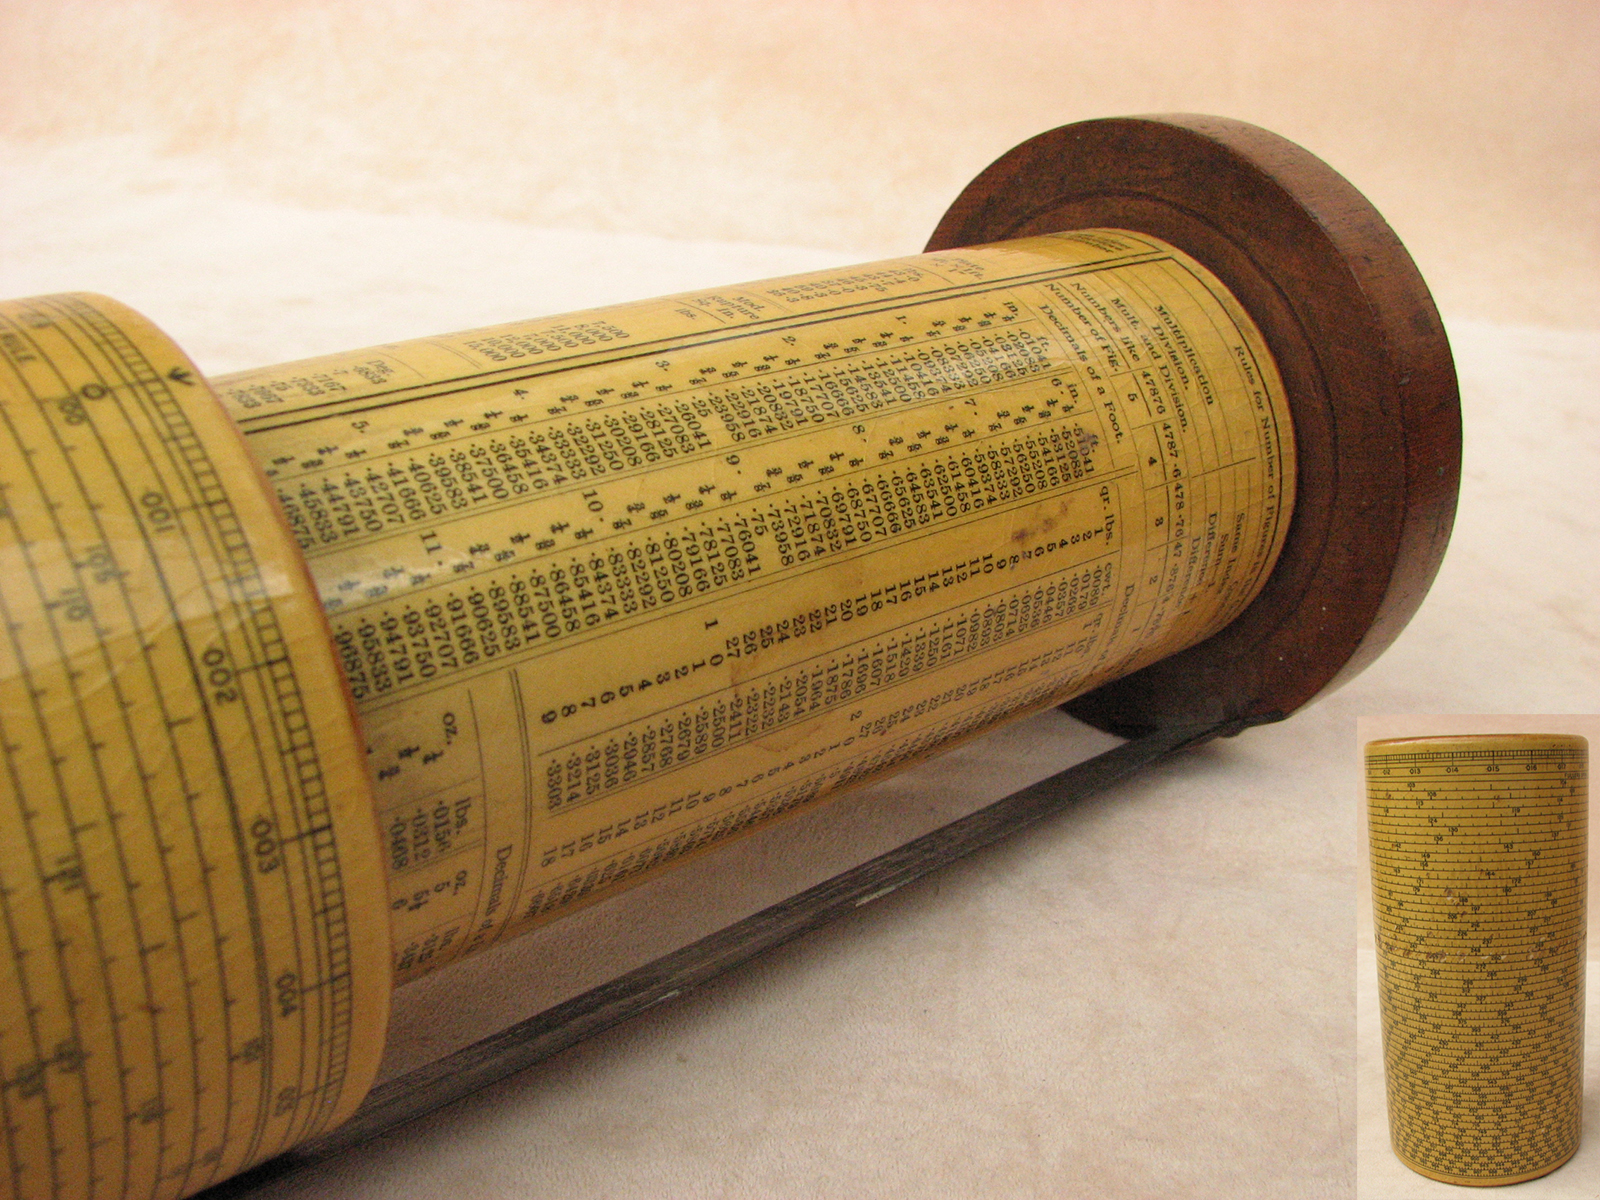 Early 20th century Stanley Fullers Slide Rule dated 1912 with instruction book